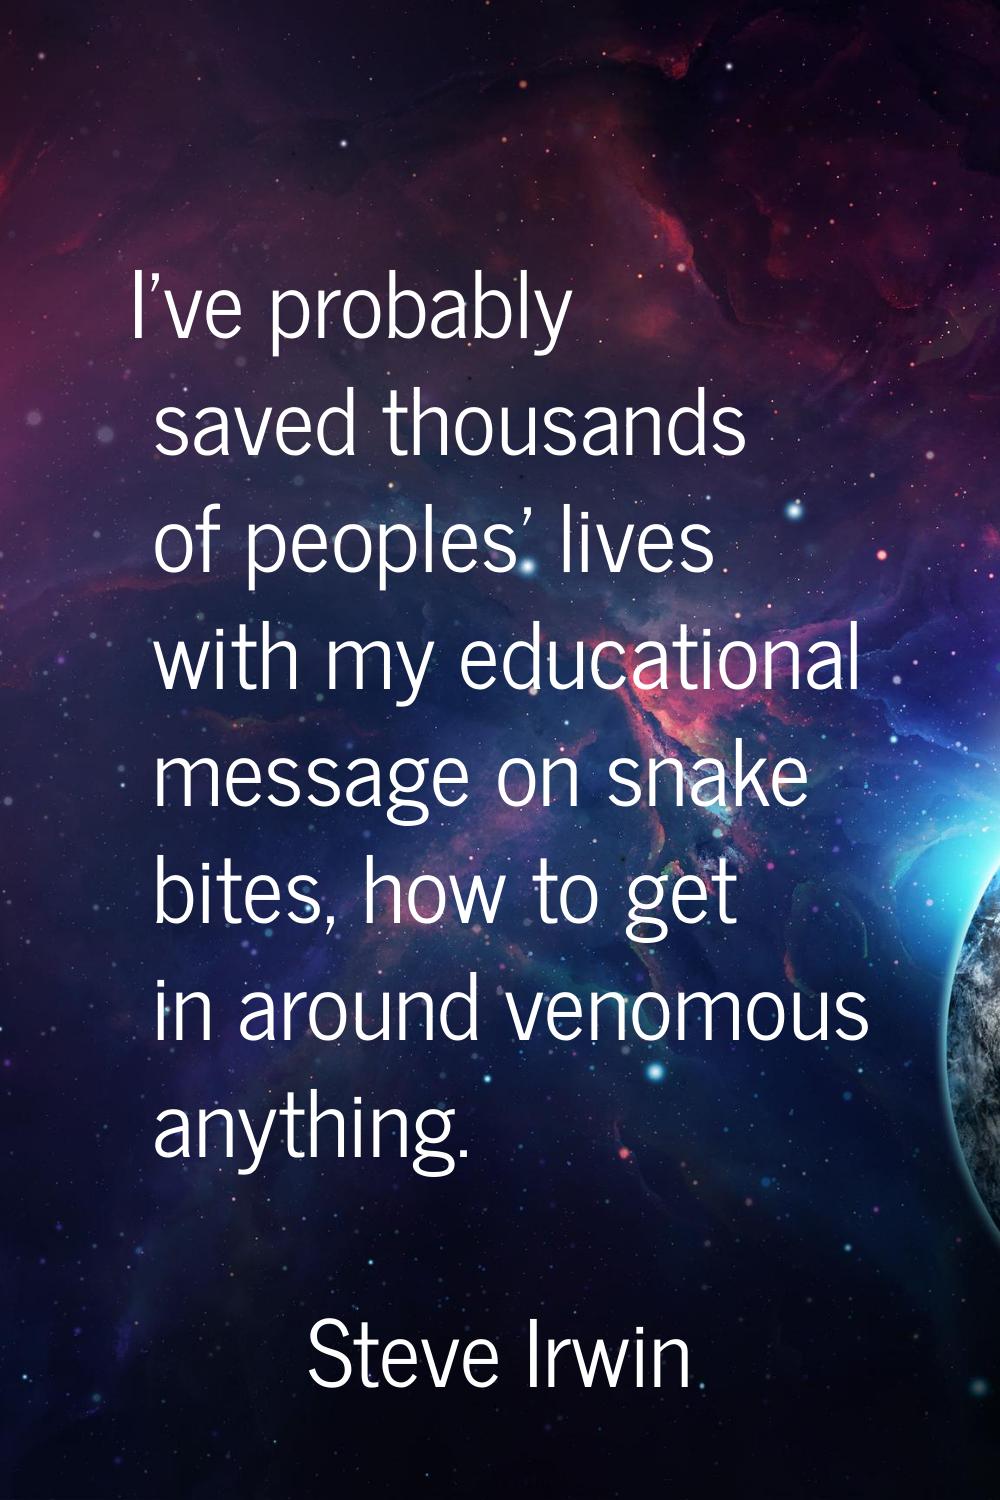 I've probably saved thousands of peoples' lives with my educational message on snake bites, how to 